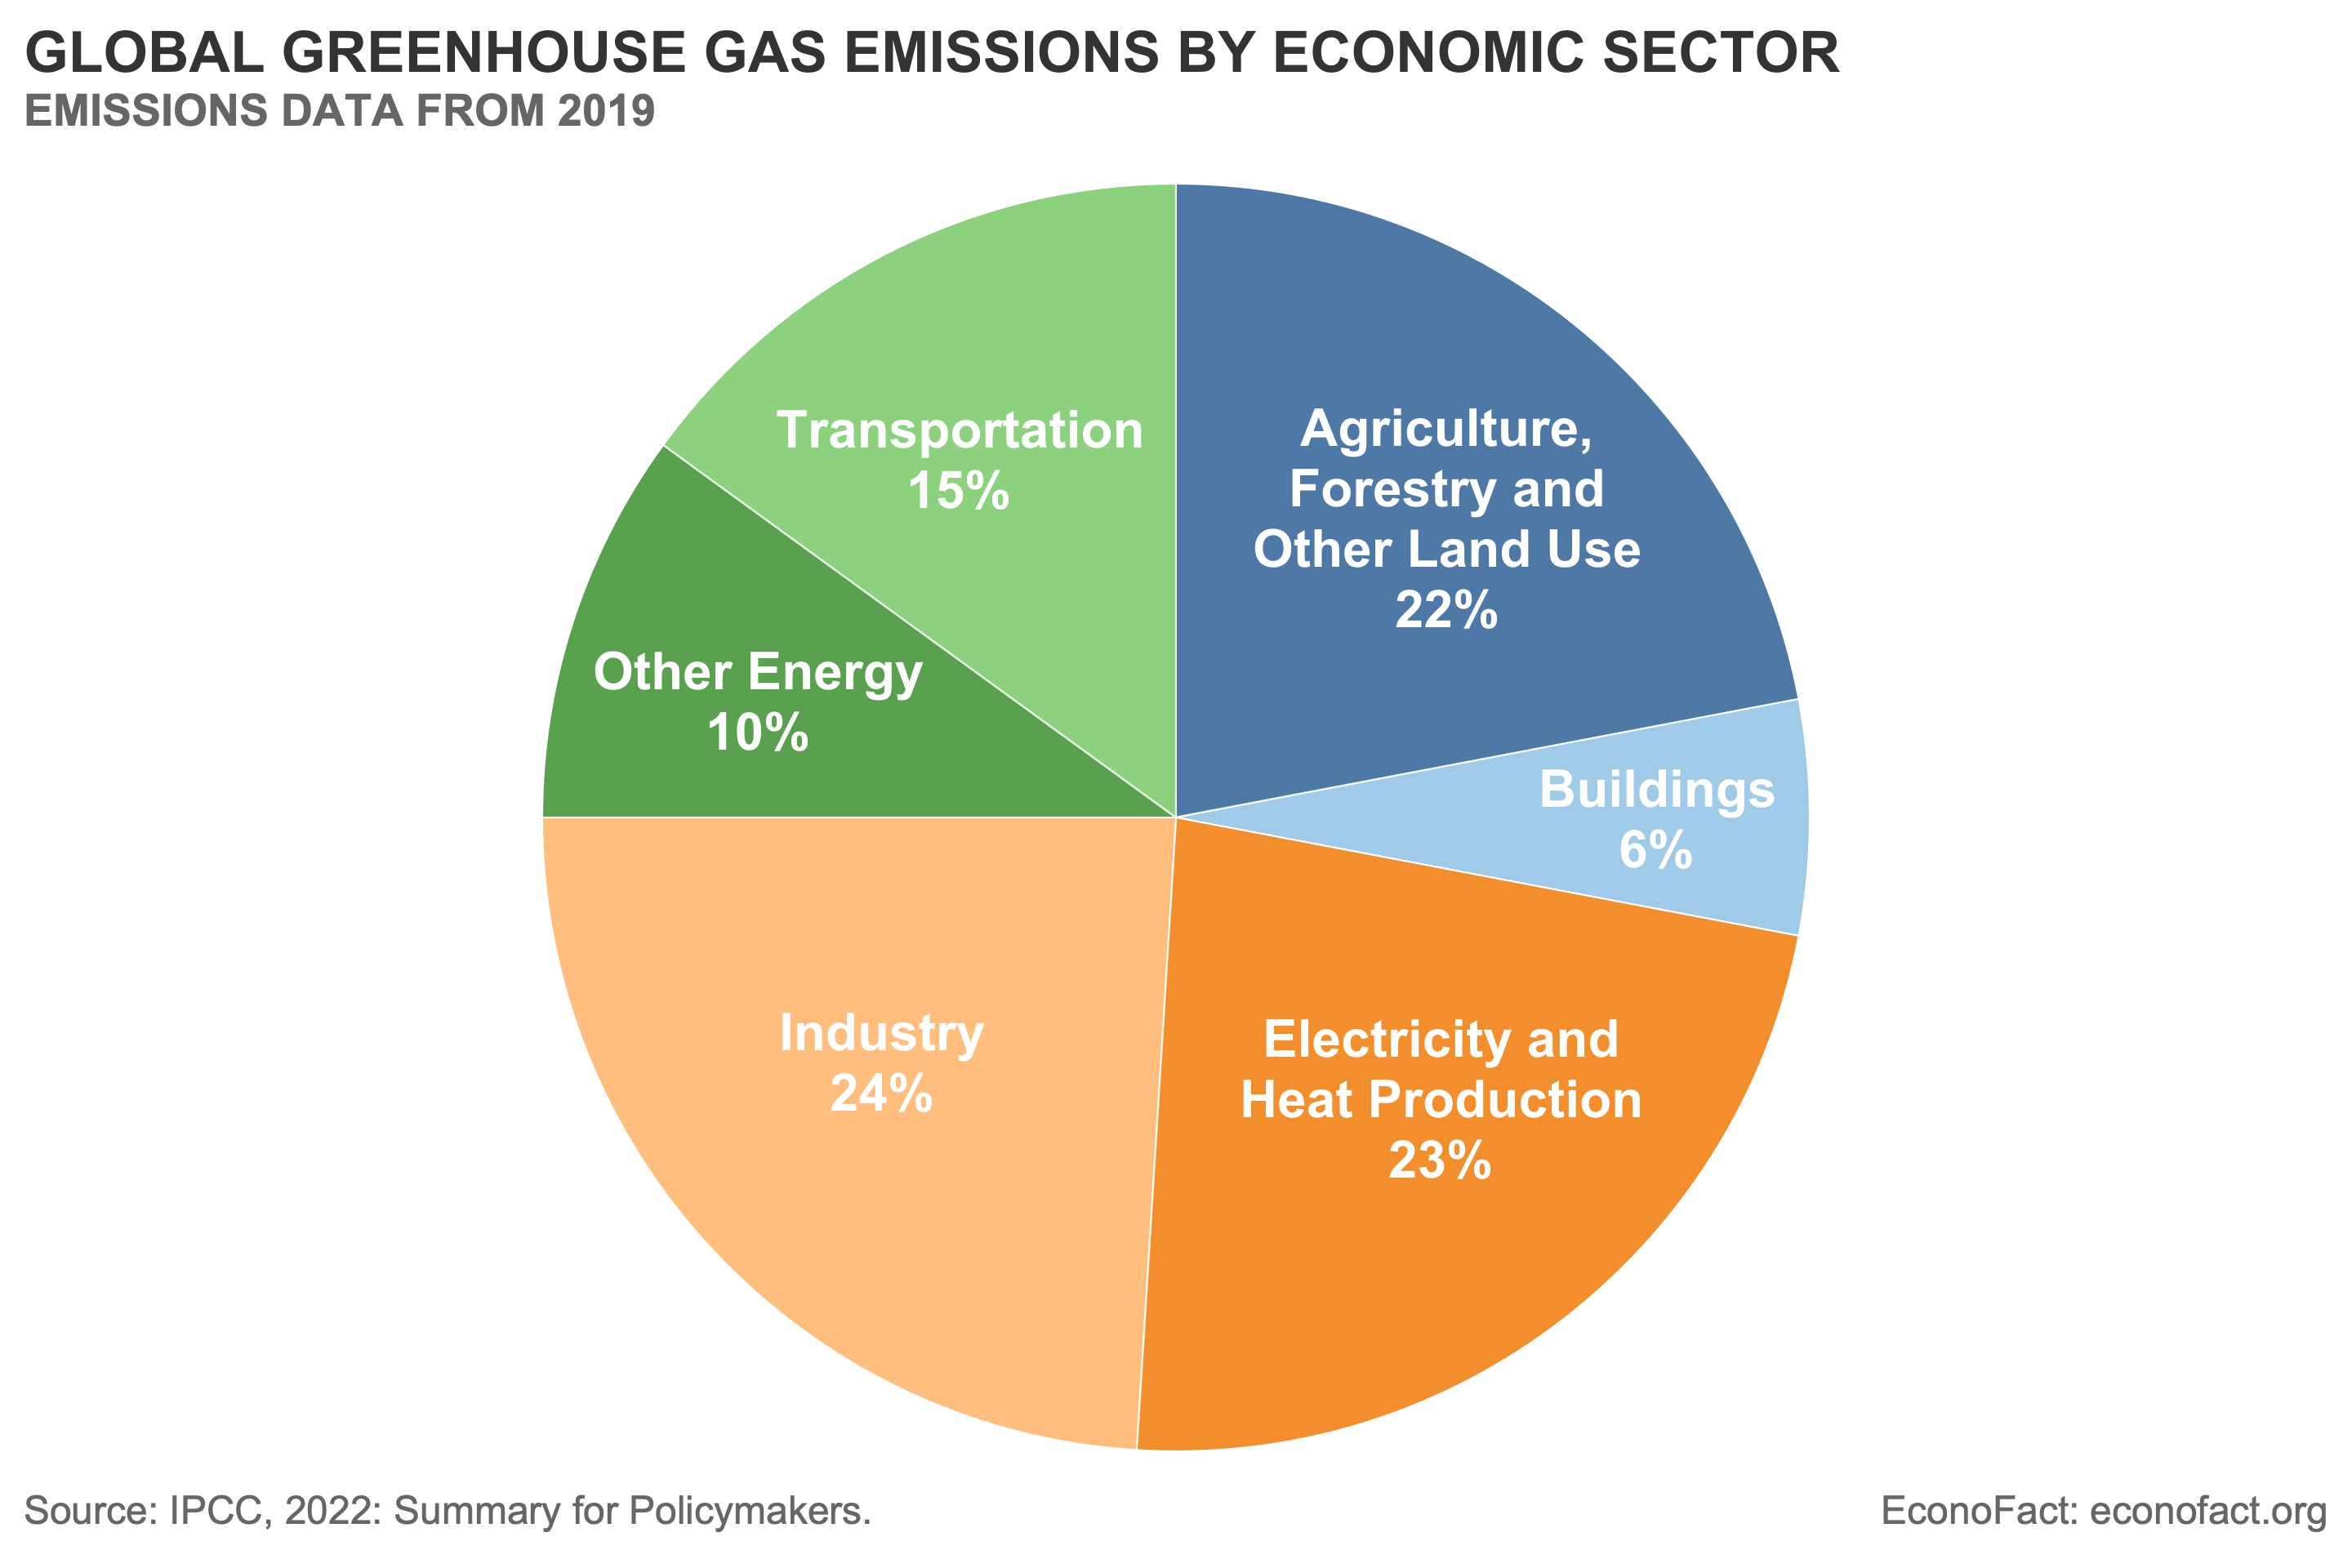 Global Greenhouse Gas Emissions by Economic Sector